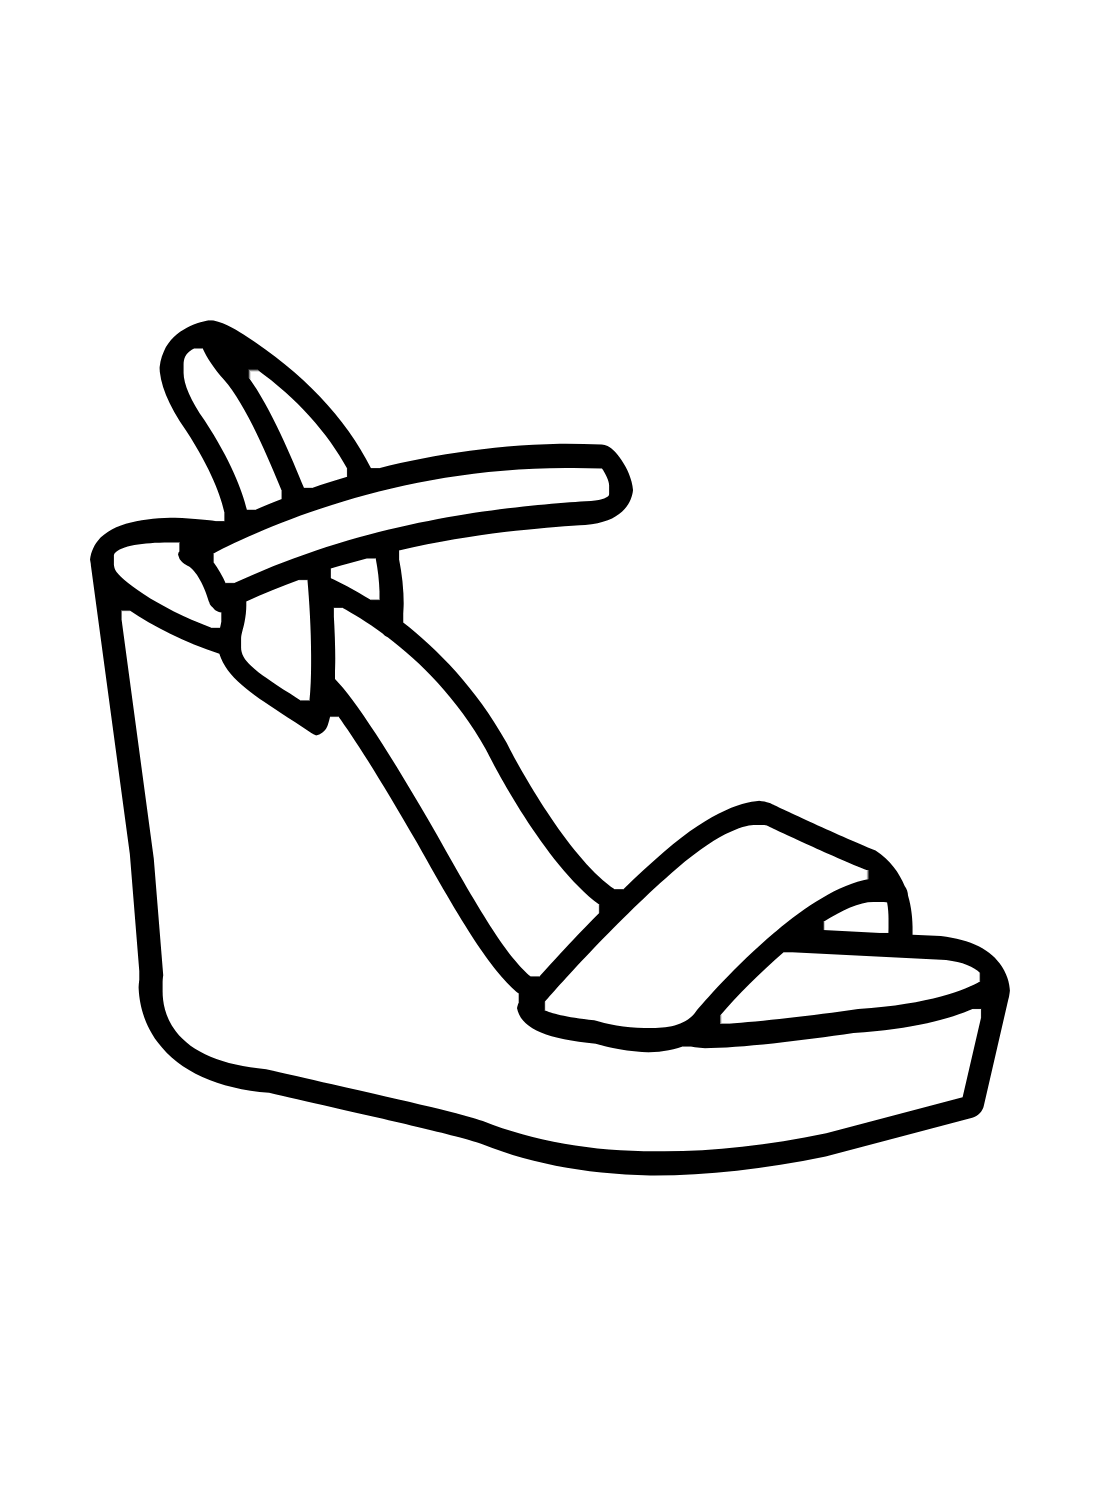 Women’s Sandal Images Coloring Page